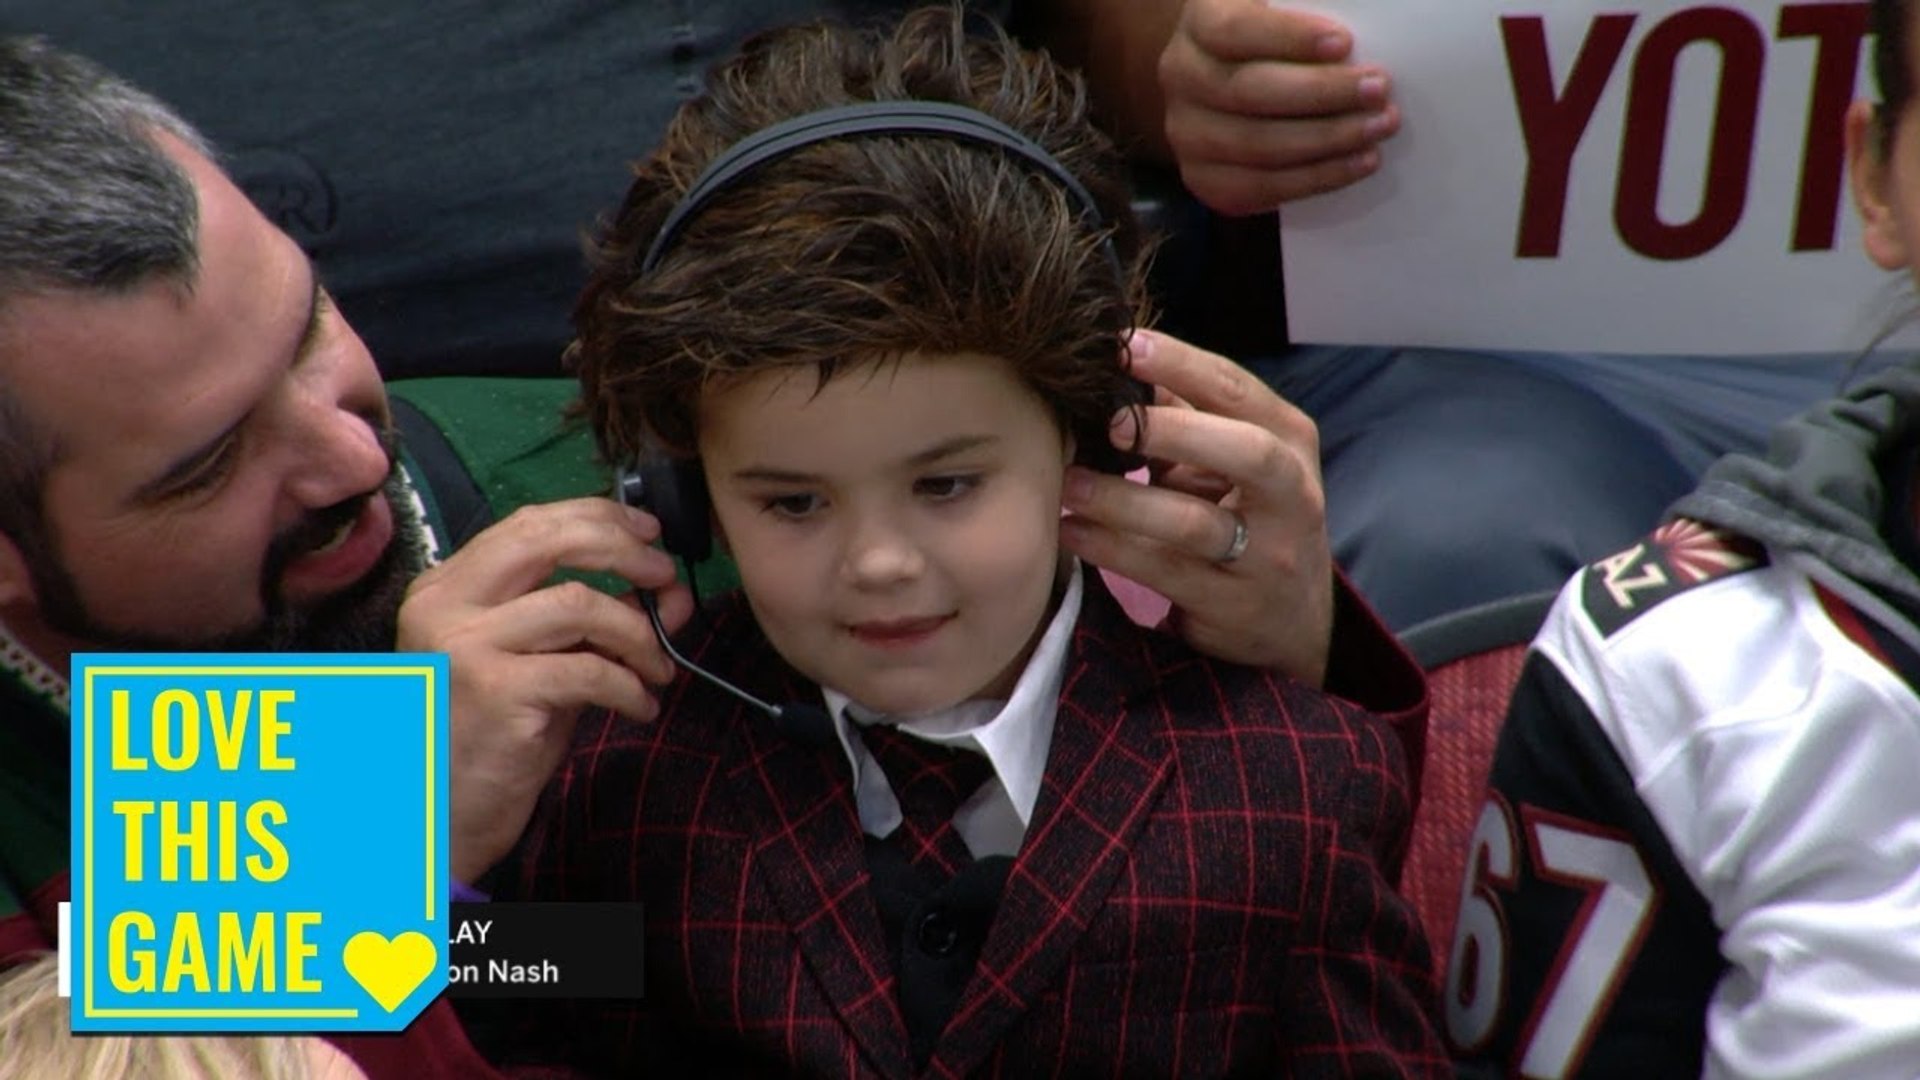 Little kid dresses as Tyson Nash at Coyotes game